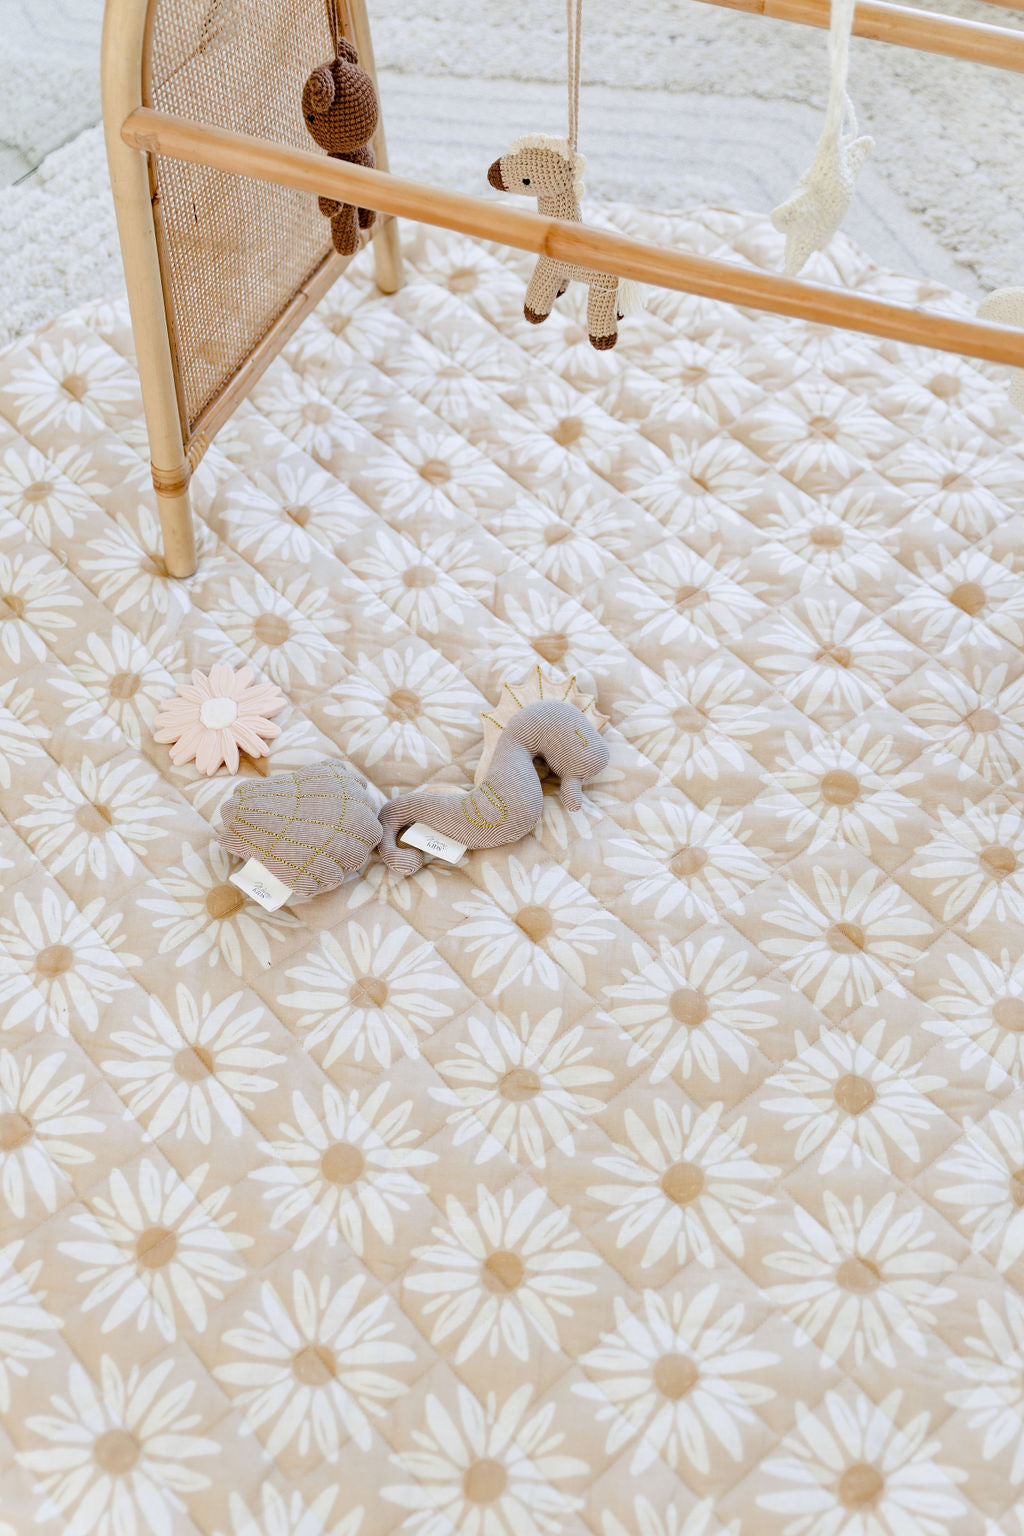 Quilted Linen Playmat - Daisy